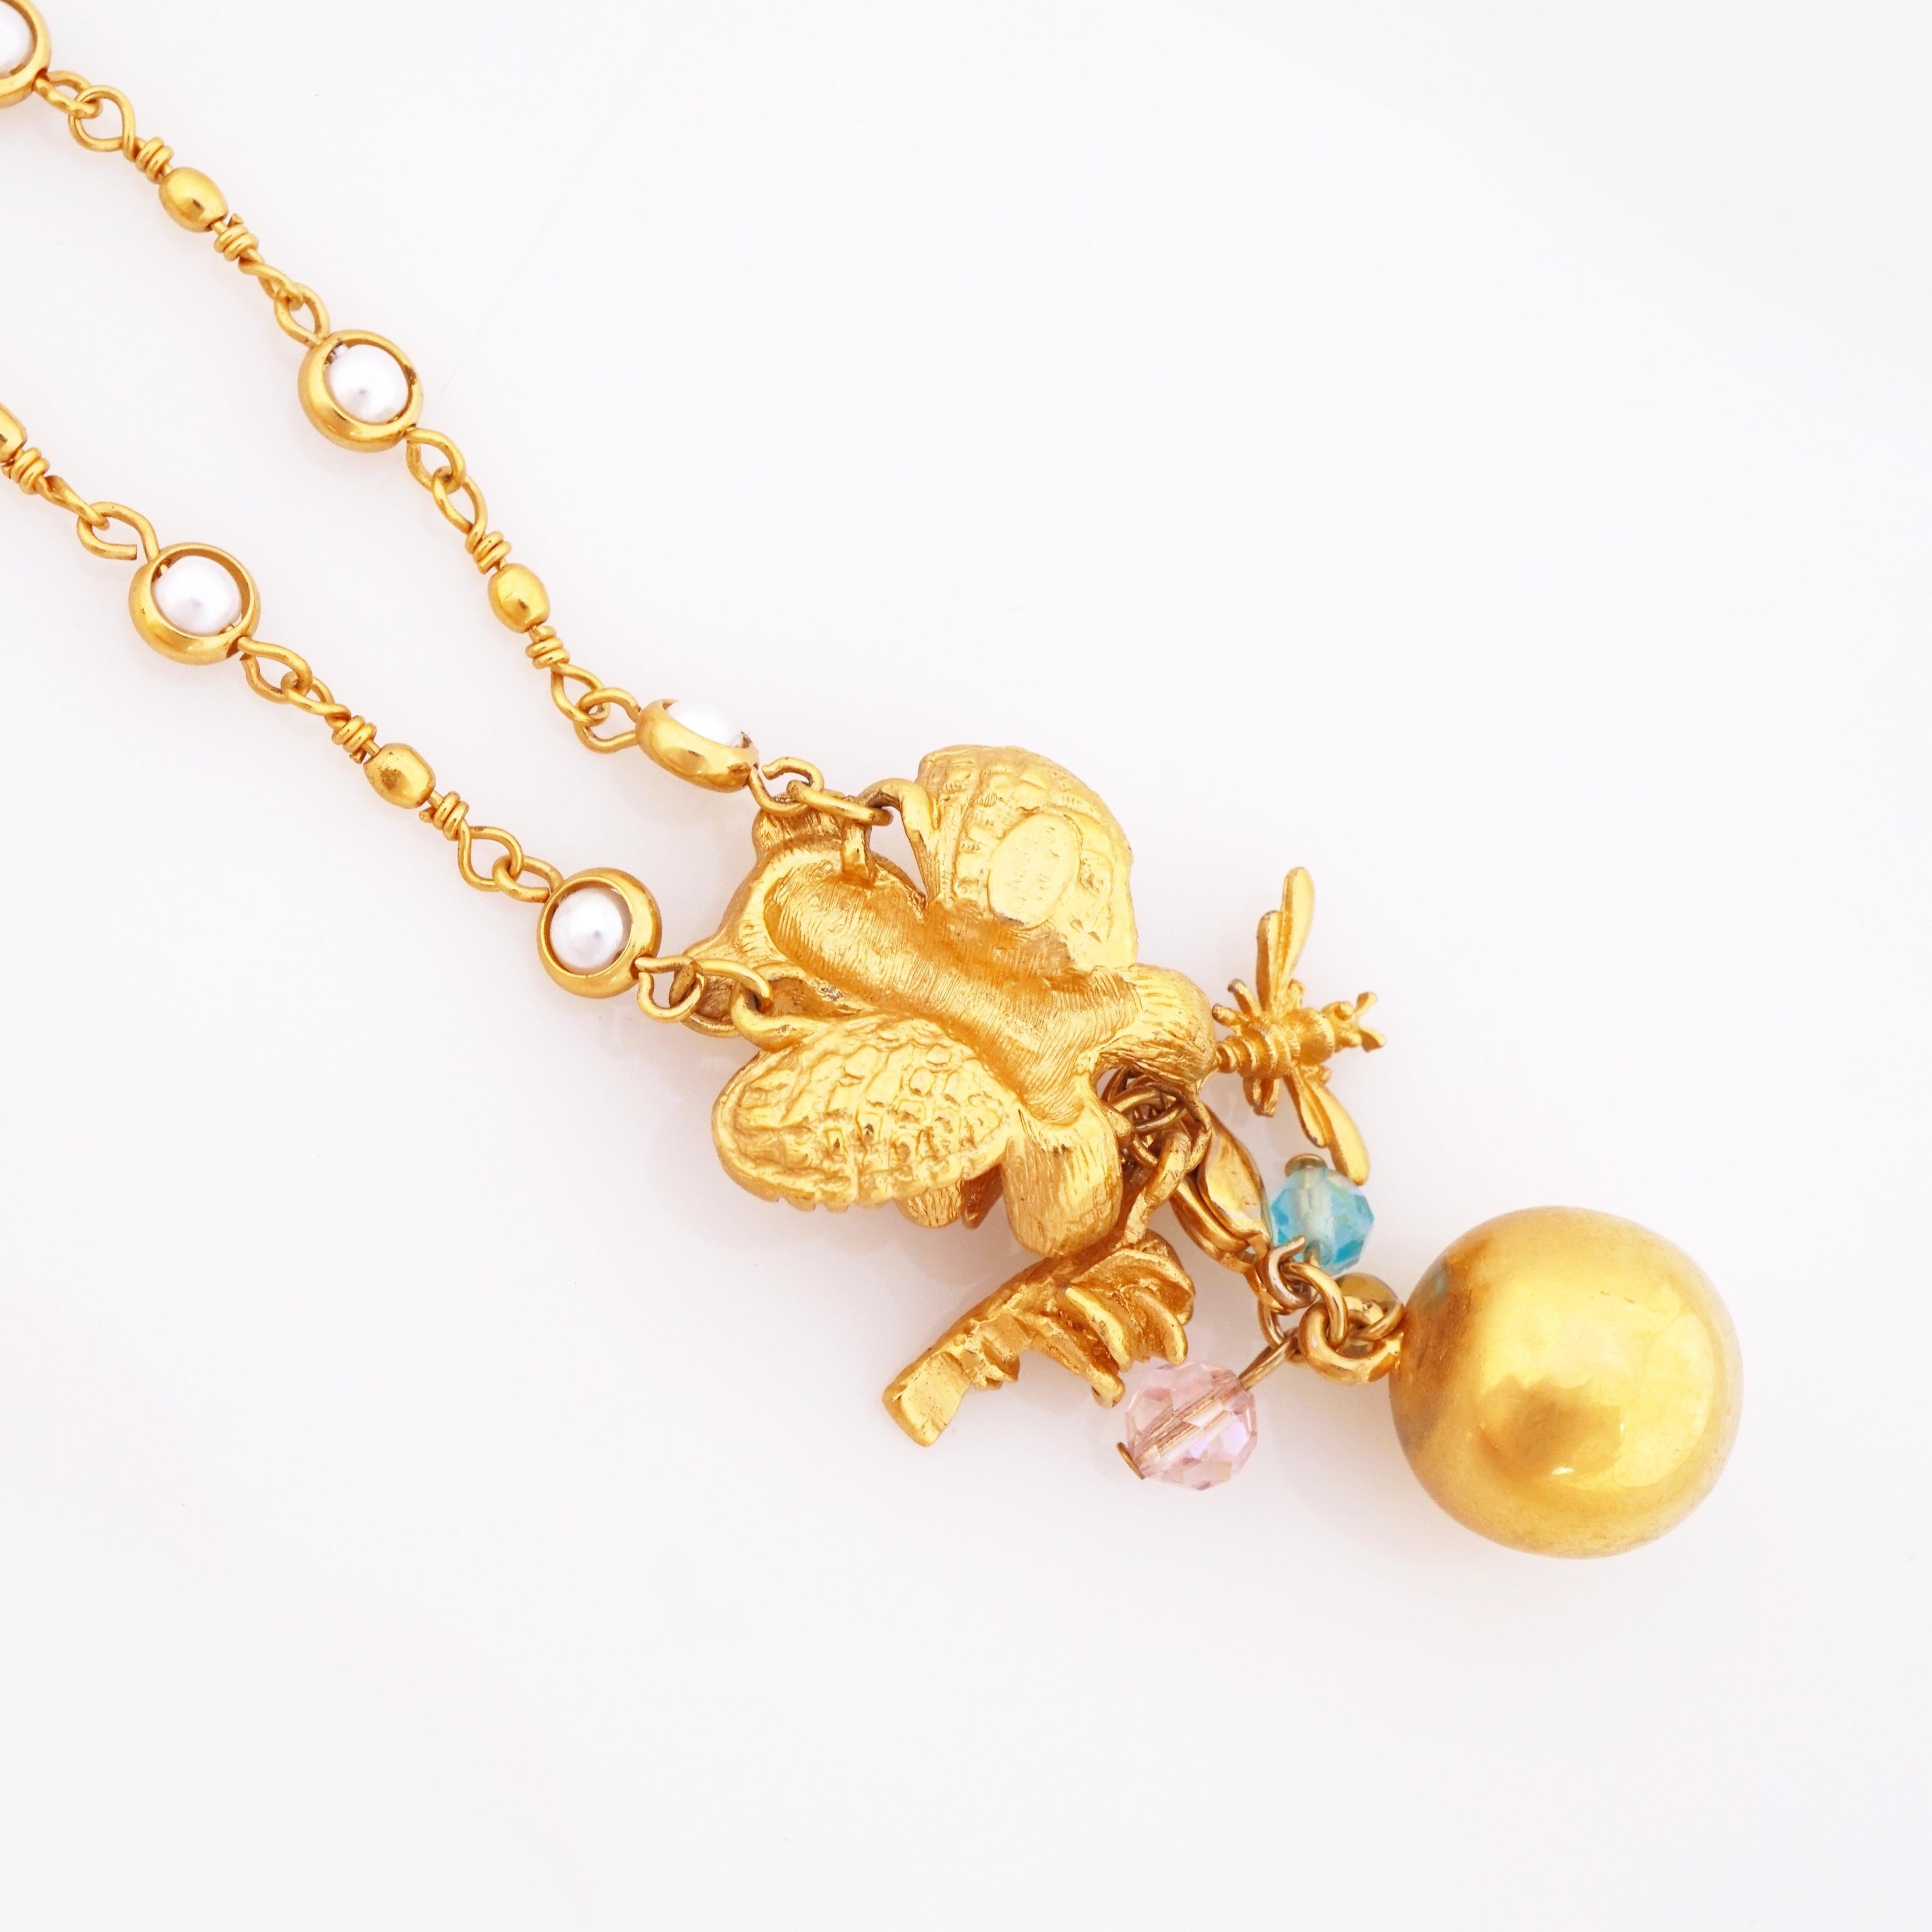 Modern Gilded Angel Teddy Bear Pendant Necklace With Bell Dangle By Kirks Folly, 1980s For Sale